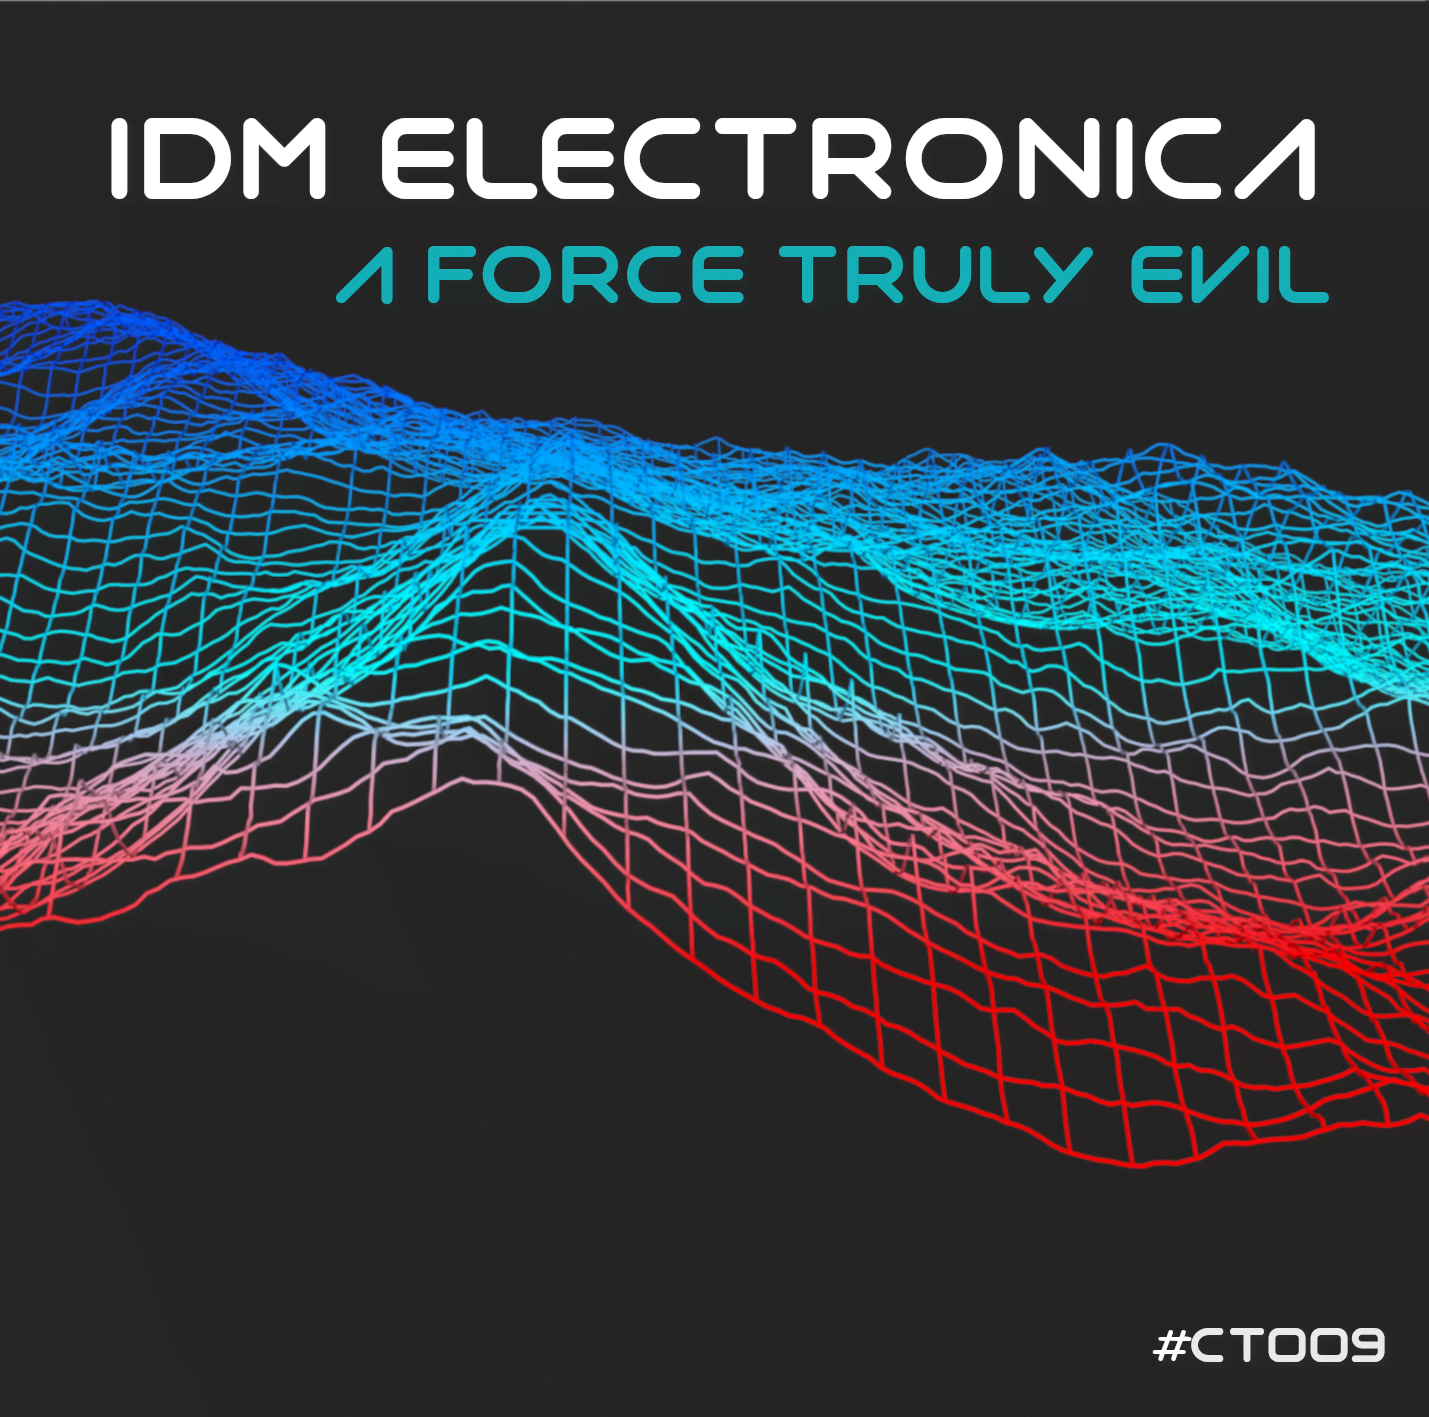 IDM Electronica Novation Circuit Tracks Pack by A Force truly Evil